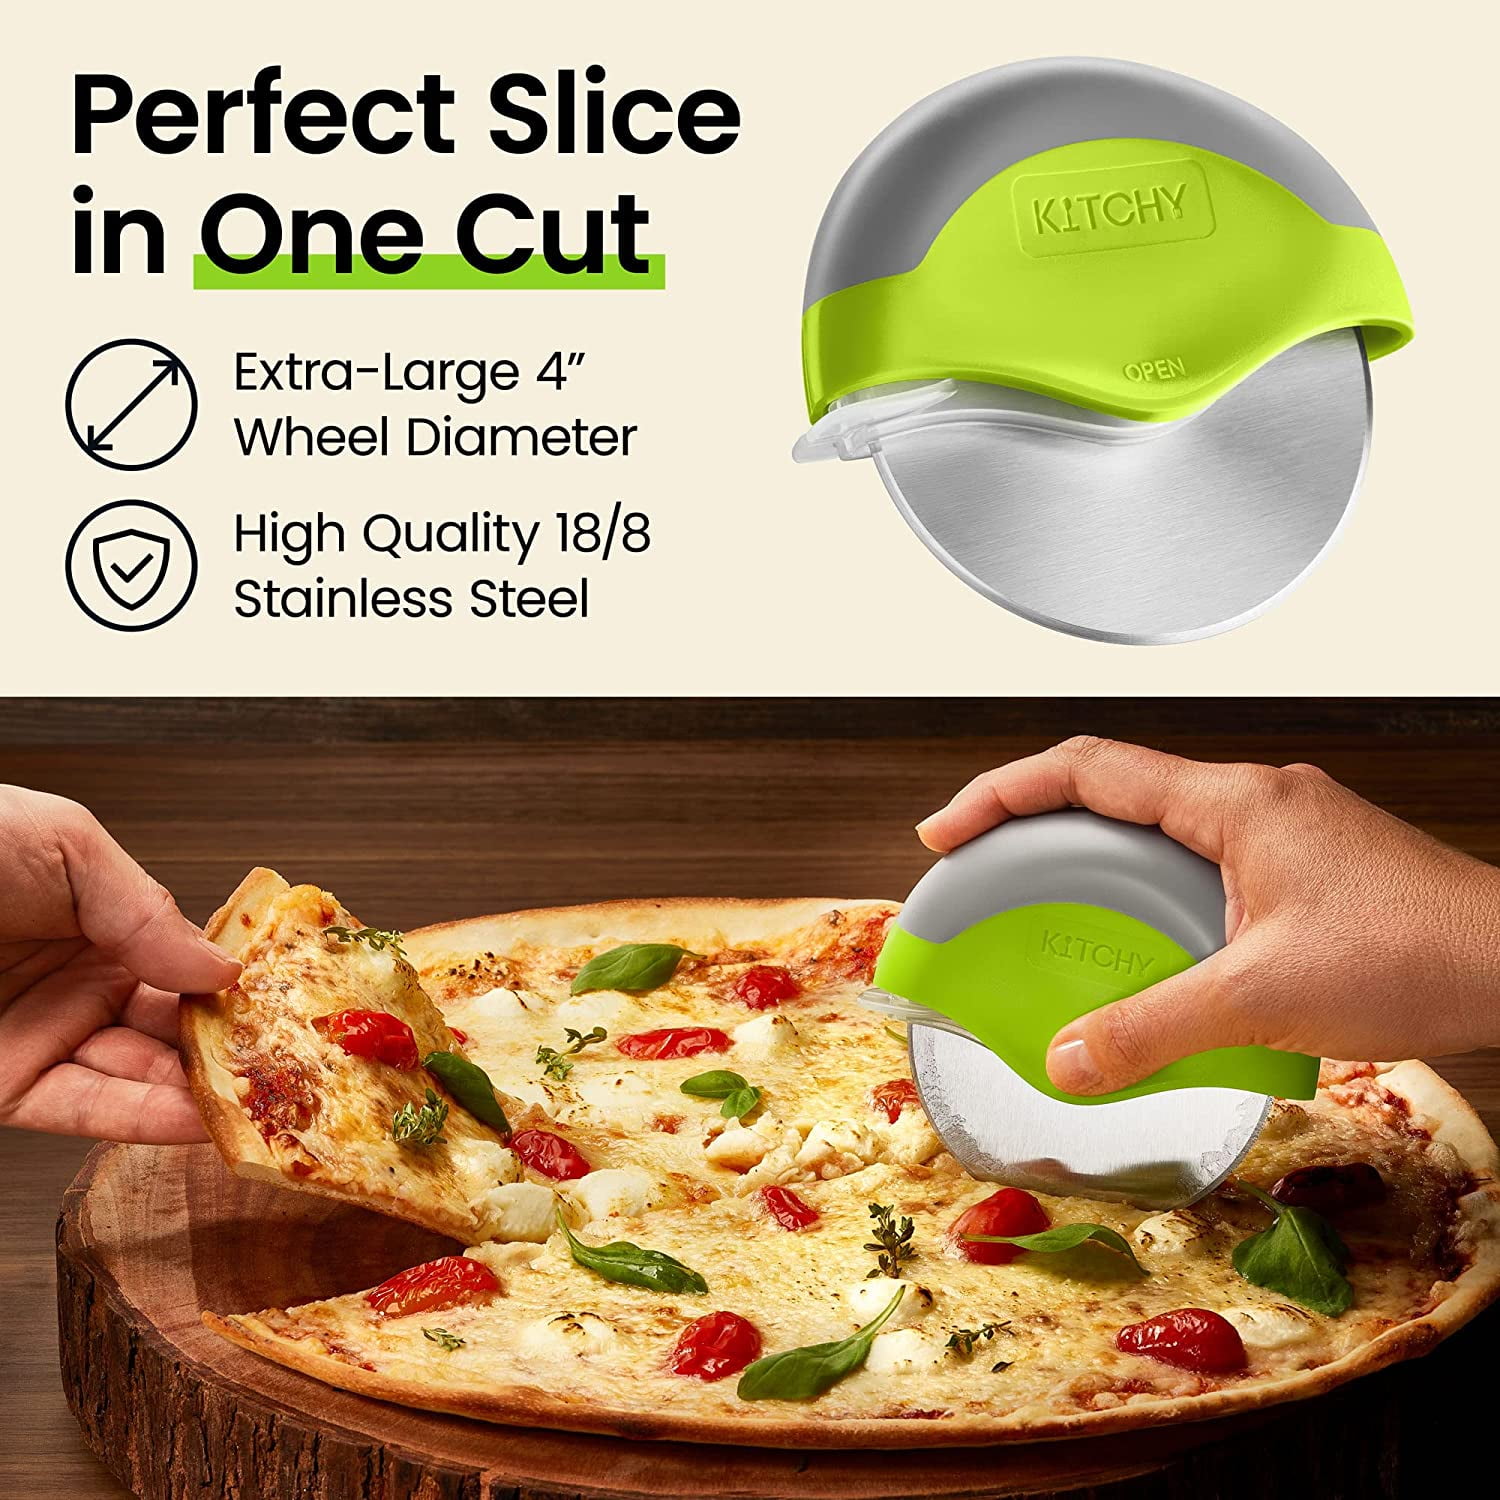 KitchenAid Gourmet Stainless Steel Pizza Wheel with Sharp Blade to Easily  Cutting Pizza Crusts, Pies, and more, Finger Guard for Safety and Comfort